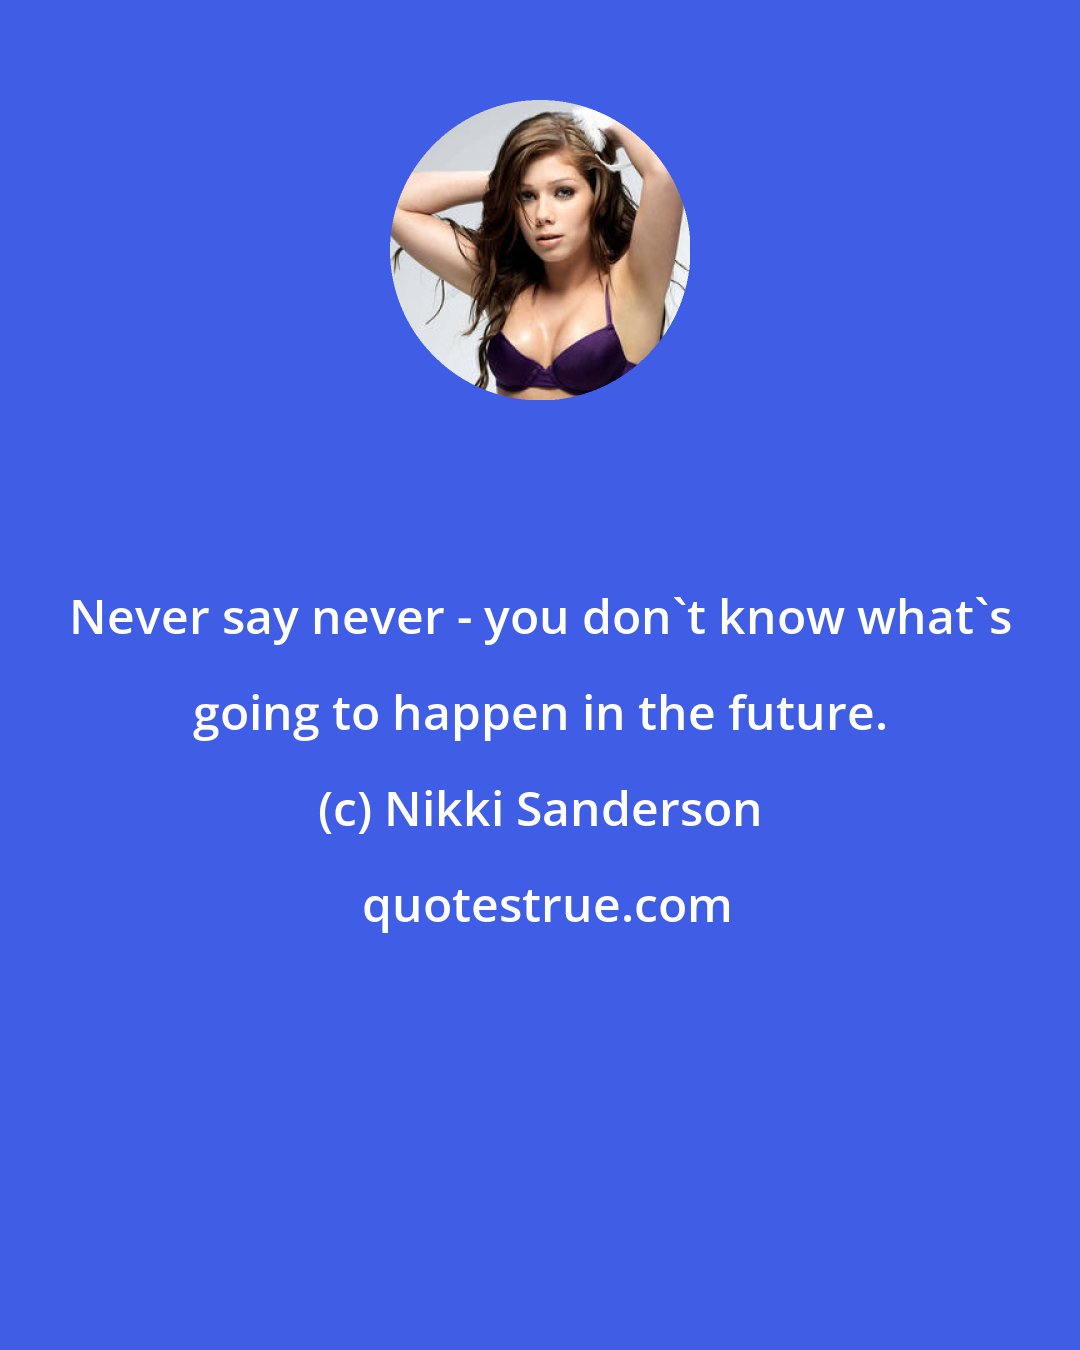 Nikki Sanderson: Never say never - you don't know what's going to happen in the future.